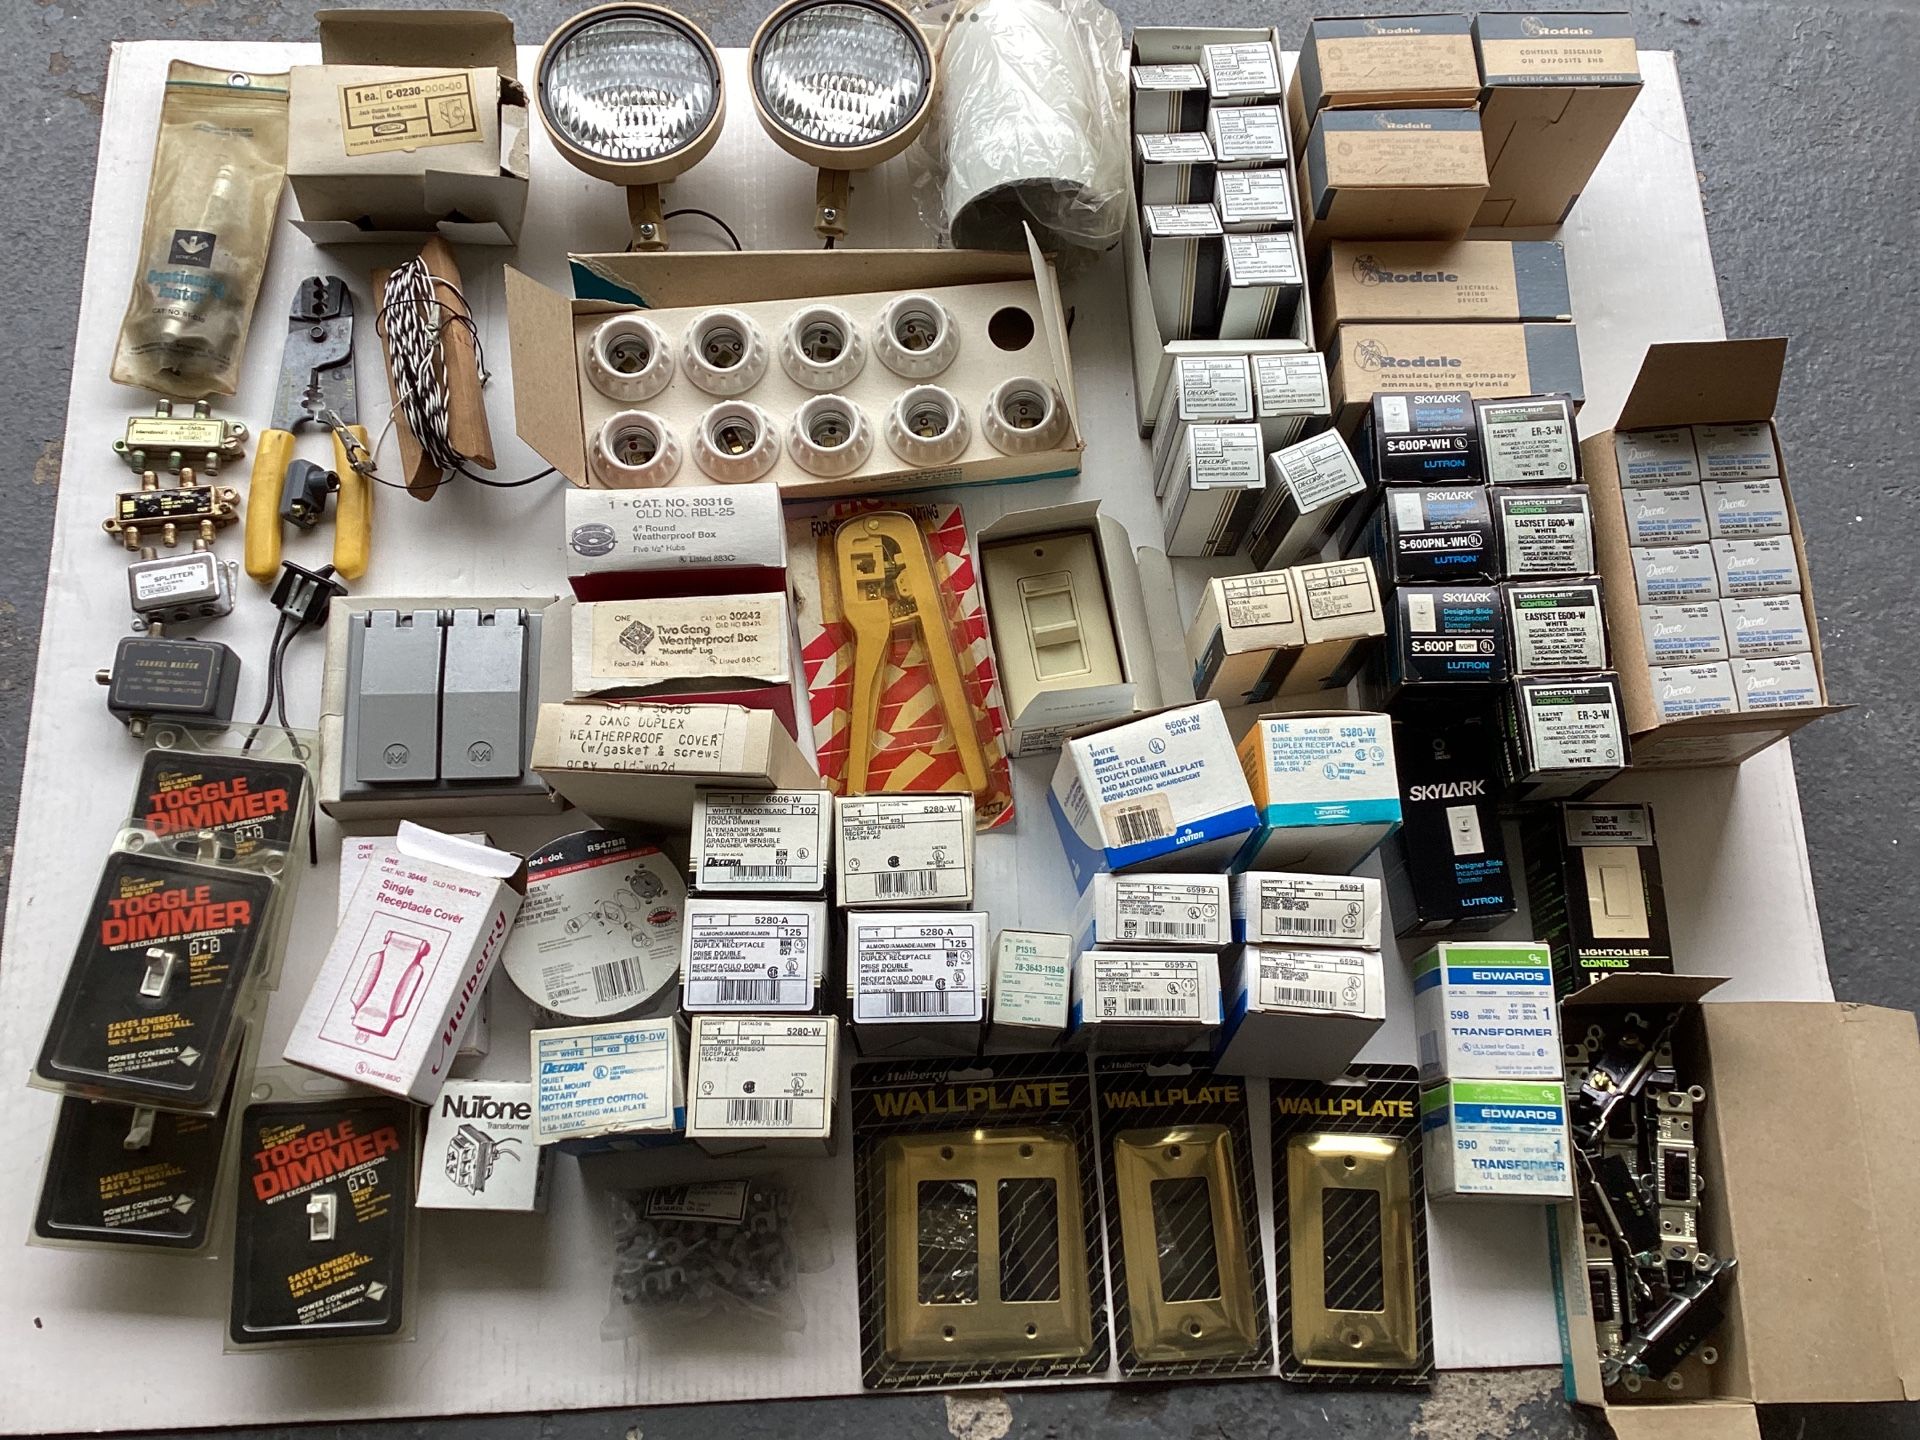 NEW Old Stock Electrical Supplies Wall Plates, Toggle Dimmers, Receptacles, Transformers, Etc. in Boxes 